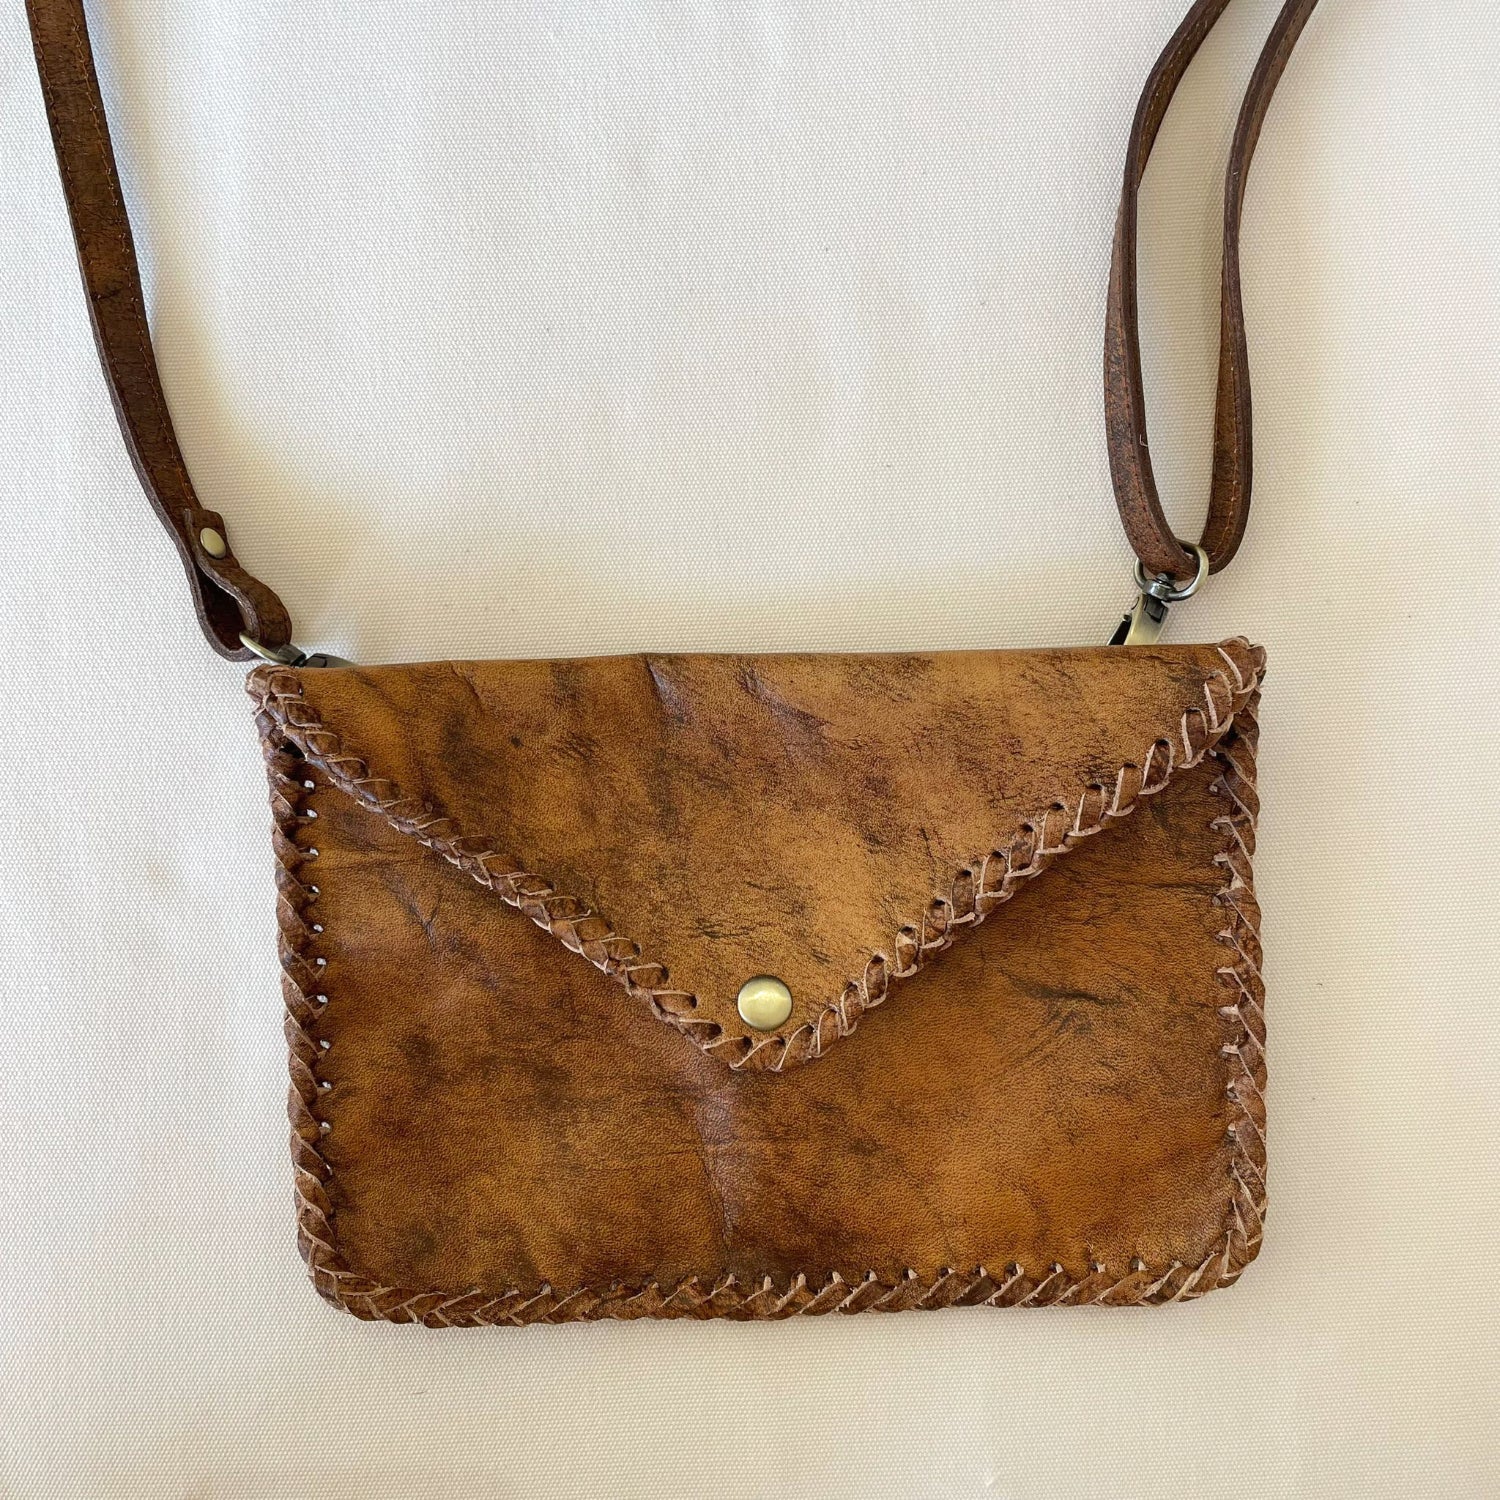 Tan Braided Mottled Leather Clutch/Bag